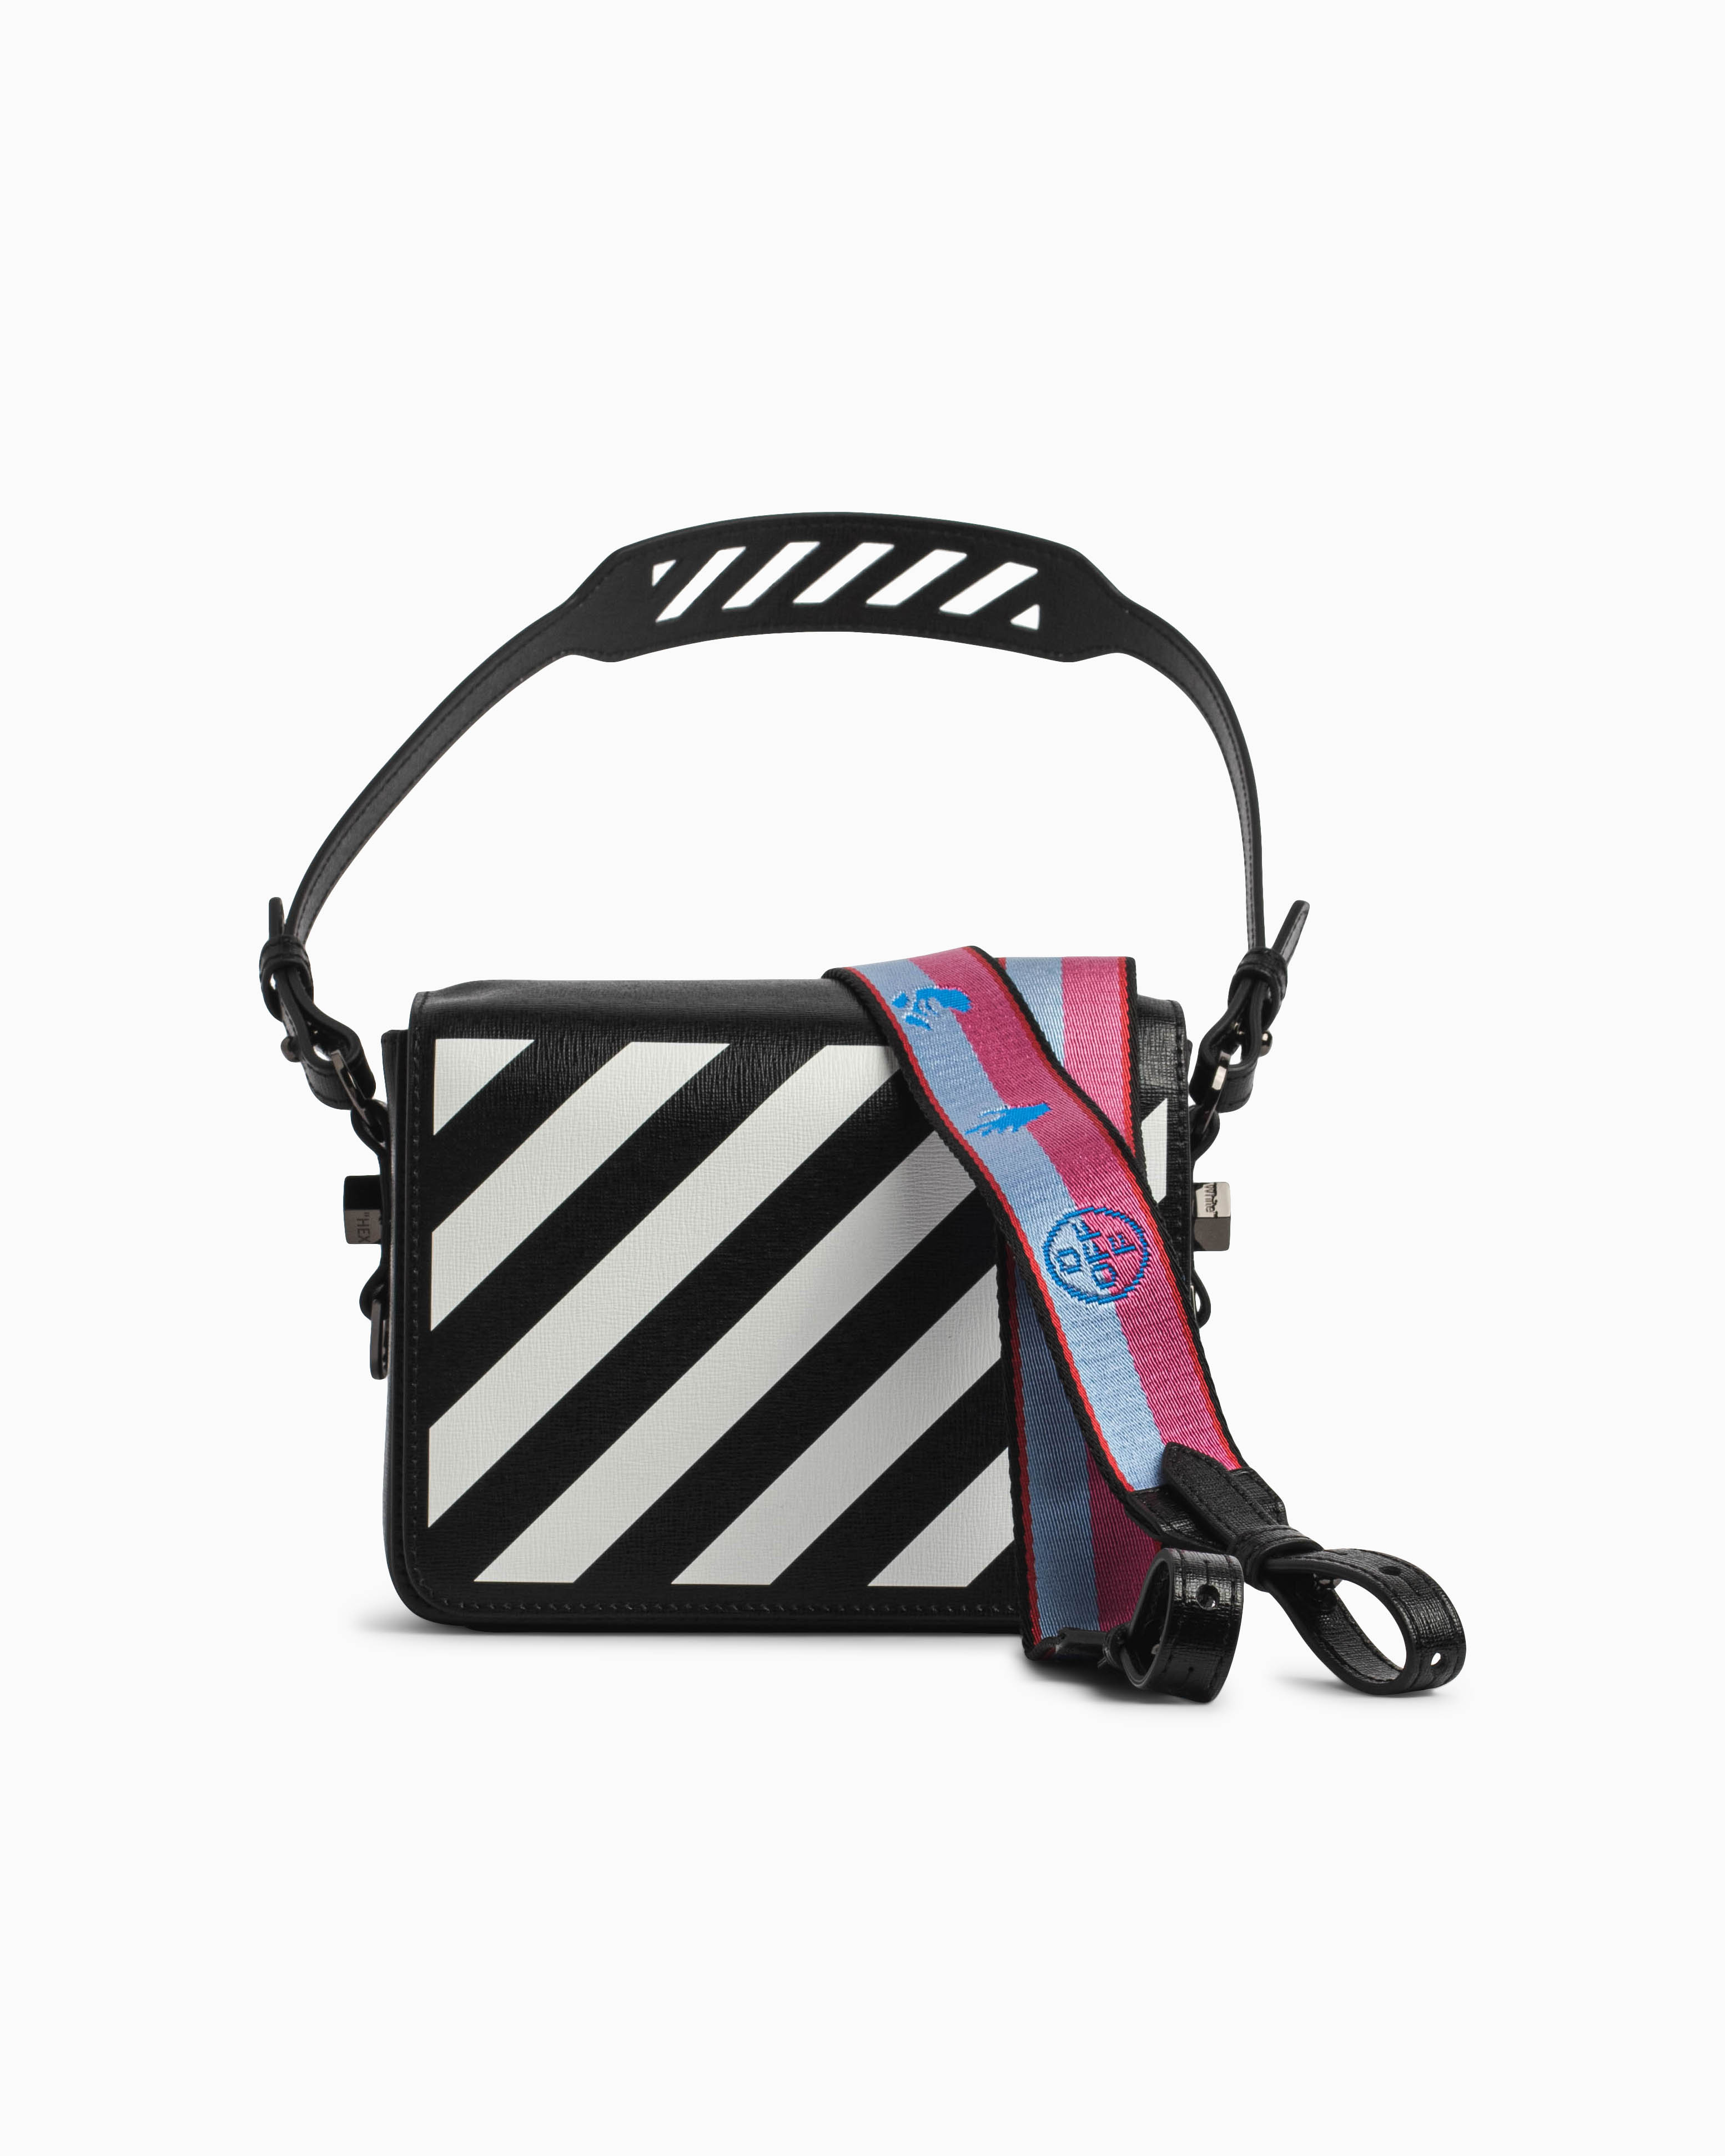 Diag Flap Bag Off-White Accessories_Clothing Bags Black